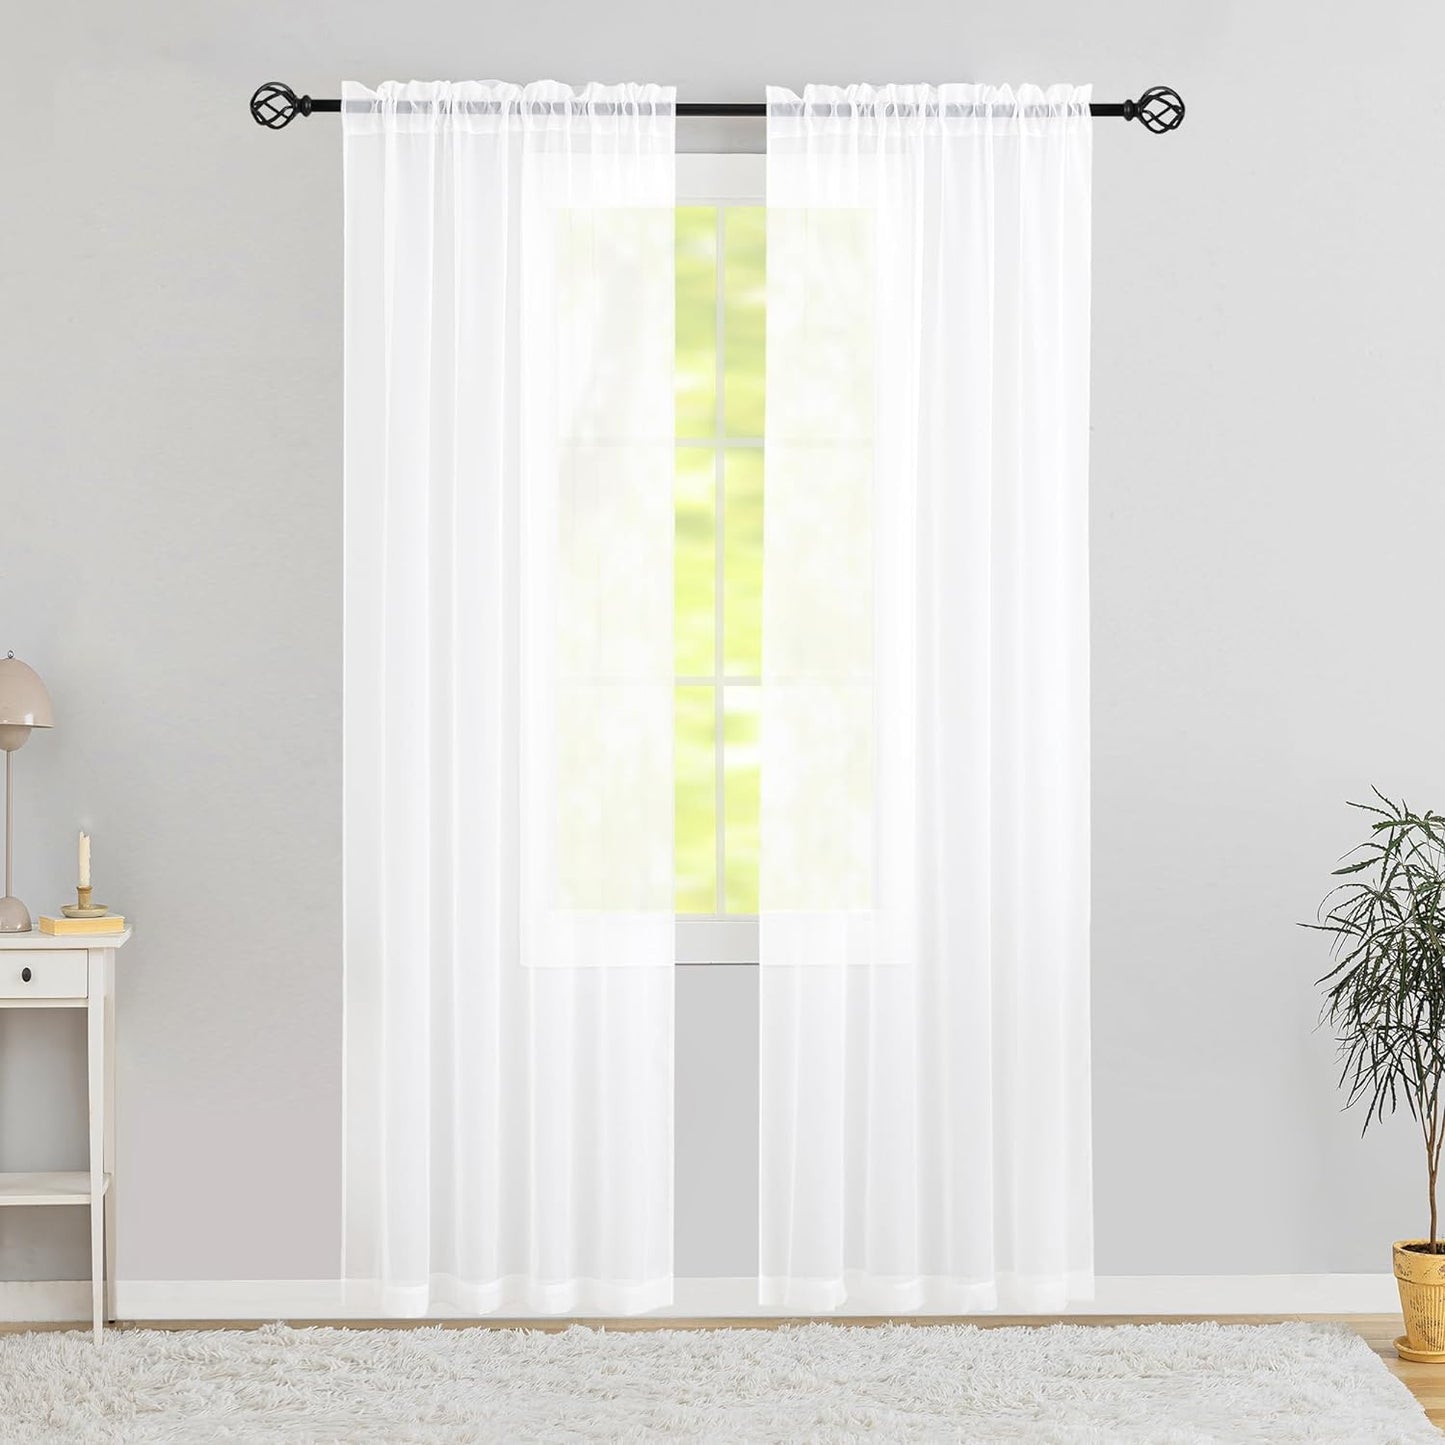 Semi Voile White Sheer Curtains 84 Inches Long 2 Panels Rod Pocket Window Treatment for Living Room Bedroom Dining Room(White 52" W X 84" L)  Karseteli White 38"W X 72"L 